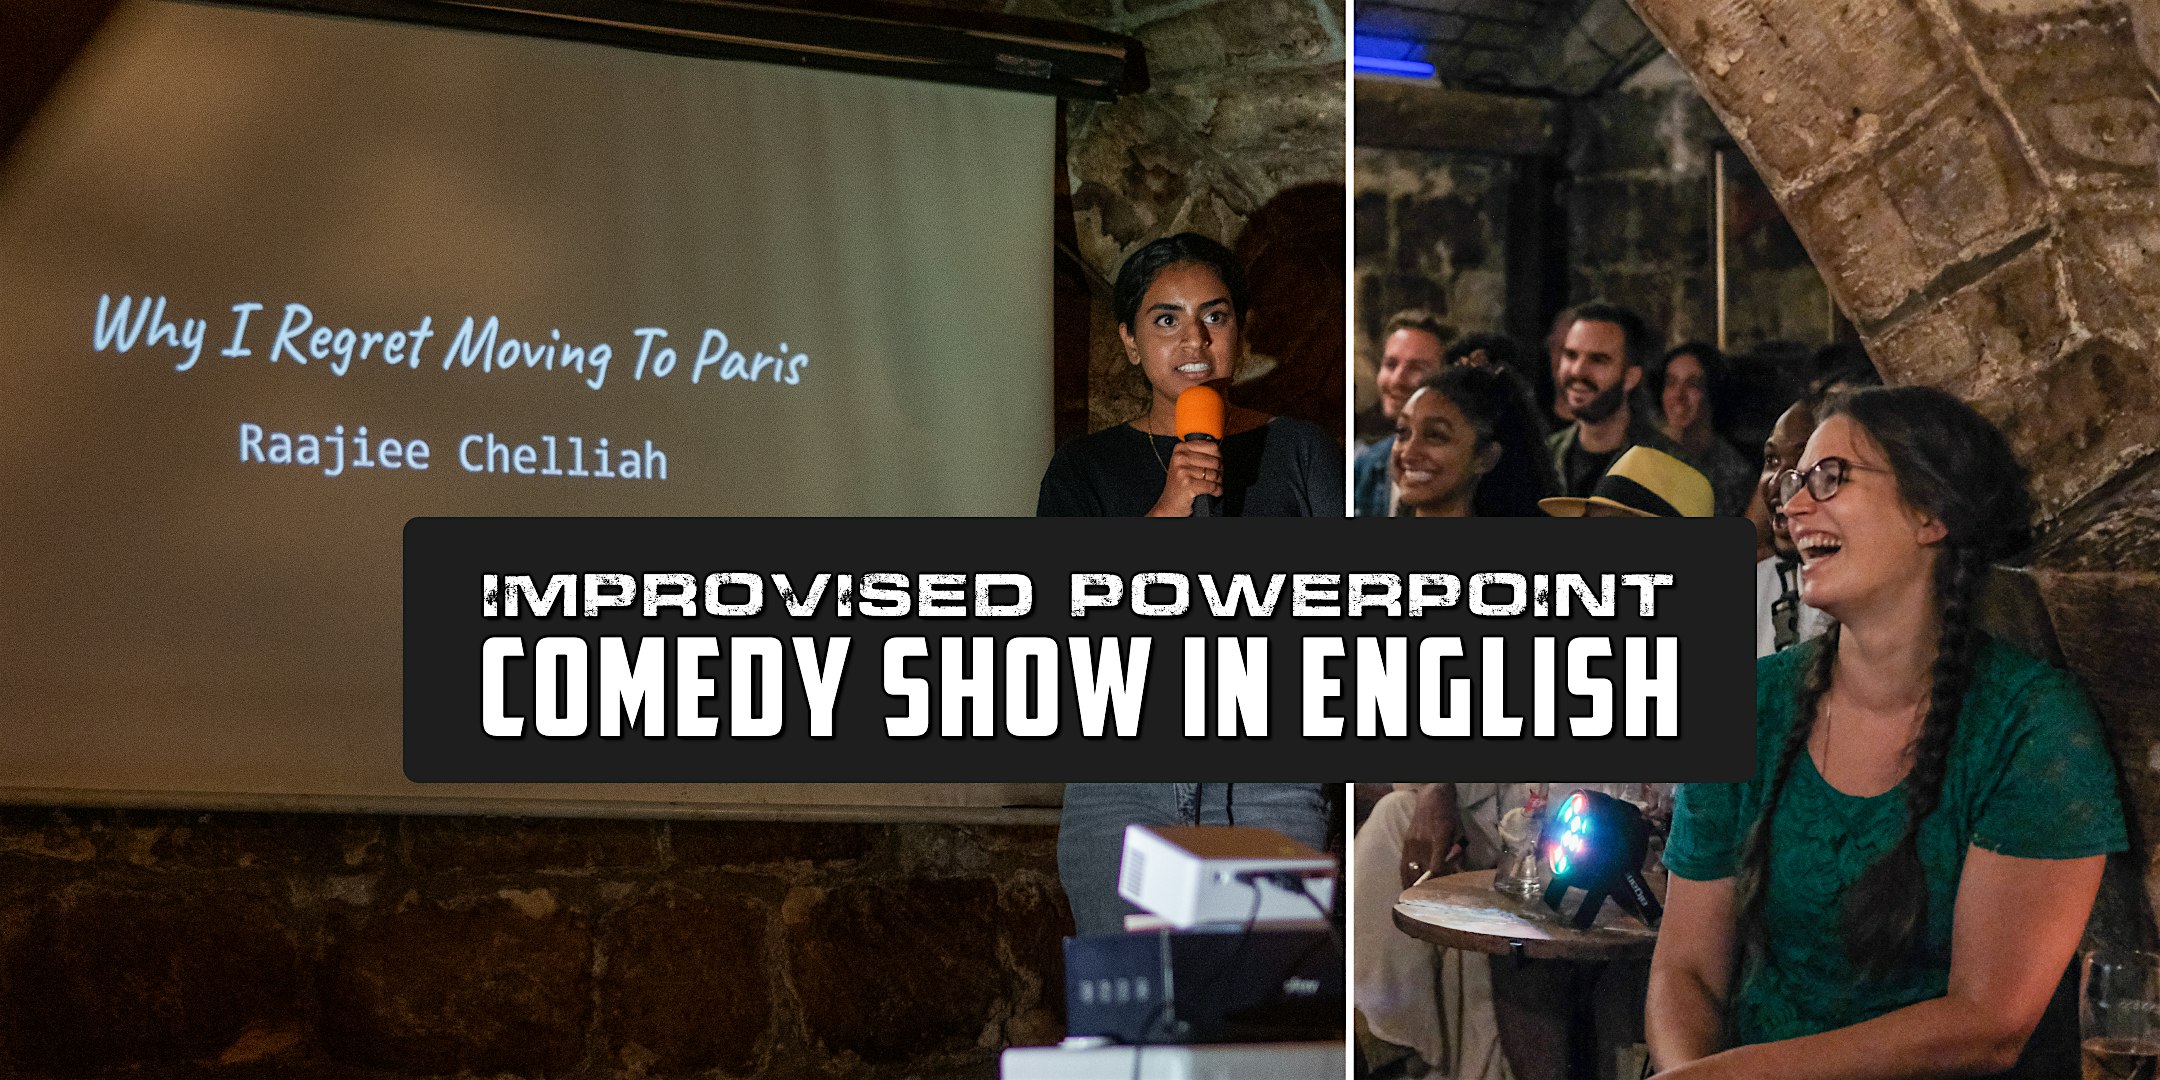 English Improvised PowerPoint Comedy Show ticket image